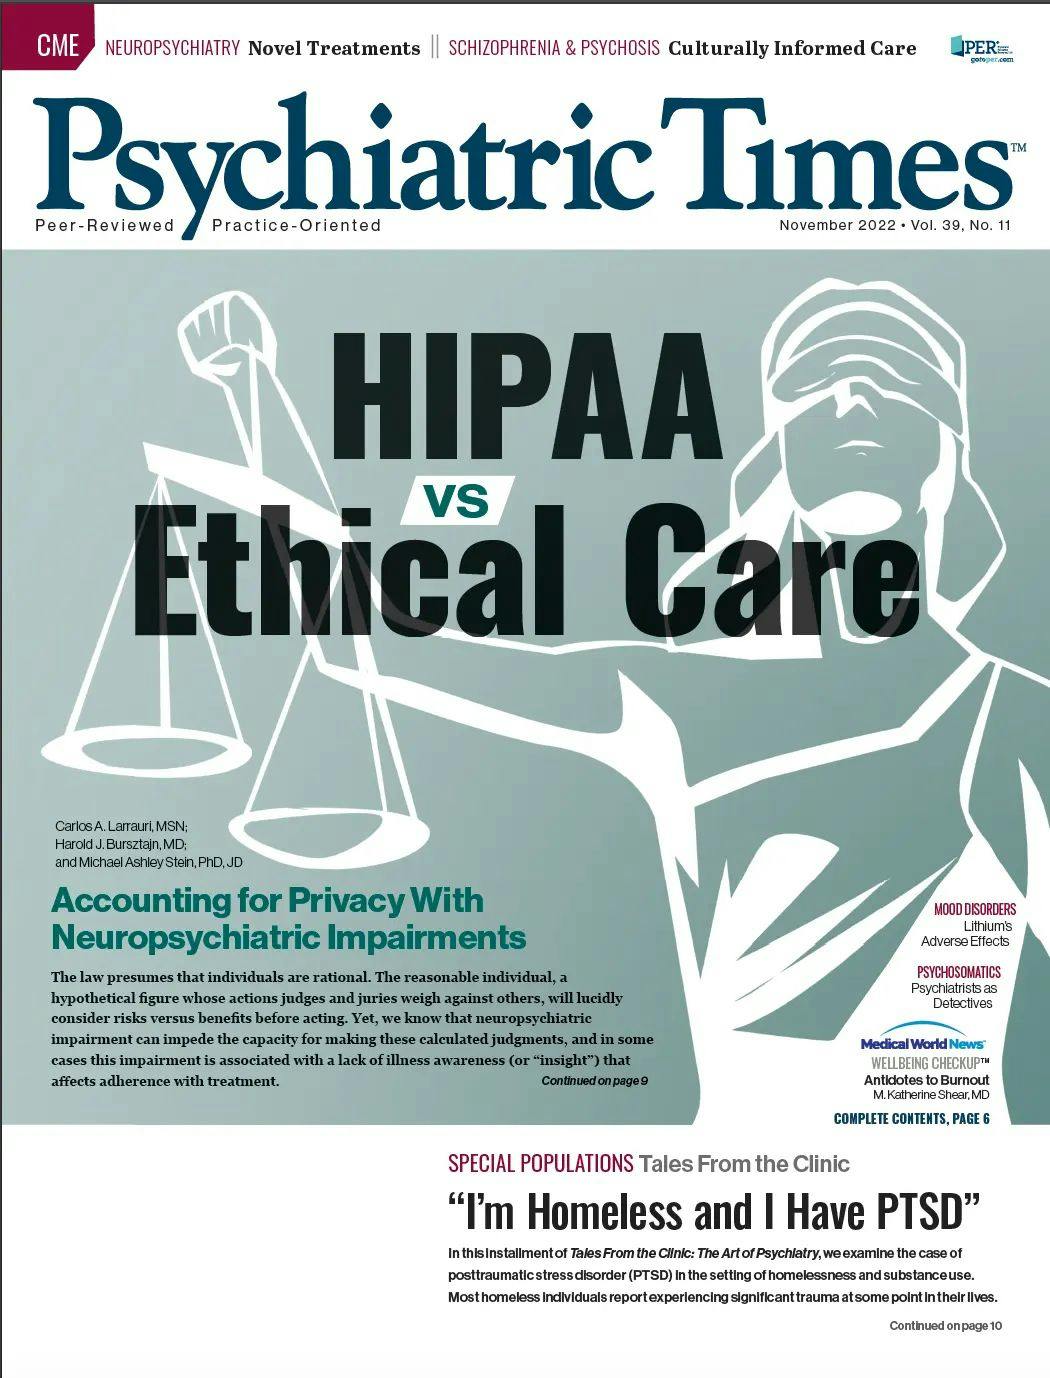 The experts weighed in on a wide variety of psychiatric issues for the November 2022 issue of Psychiatric Times.